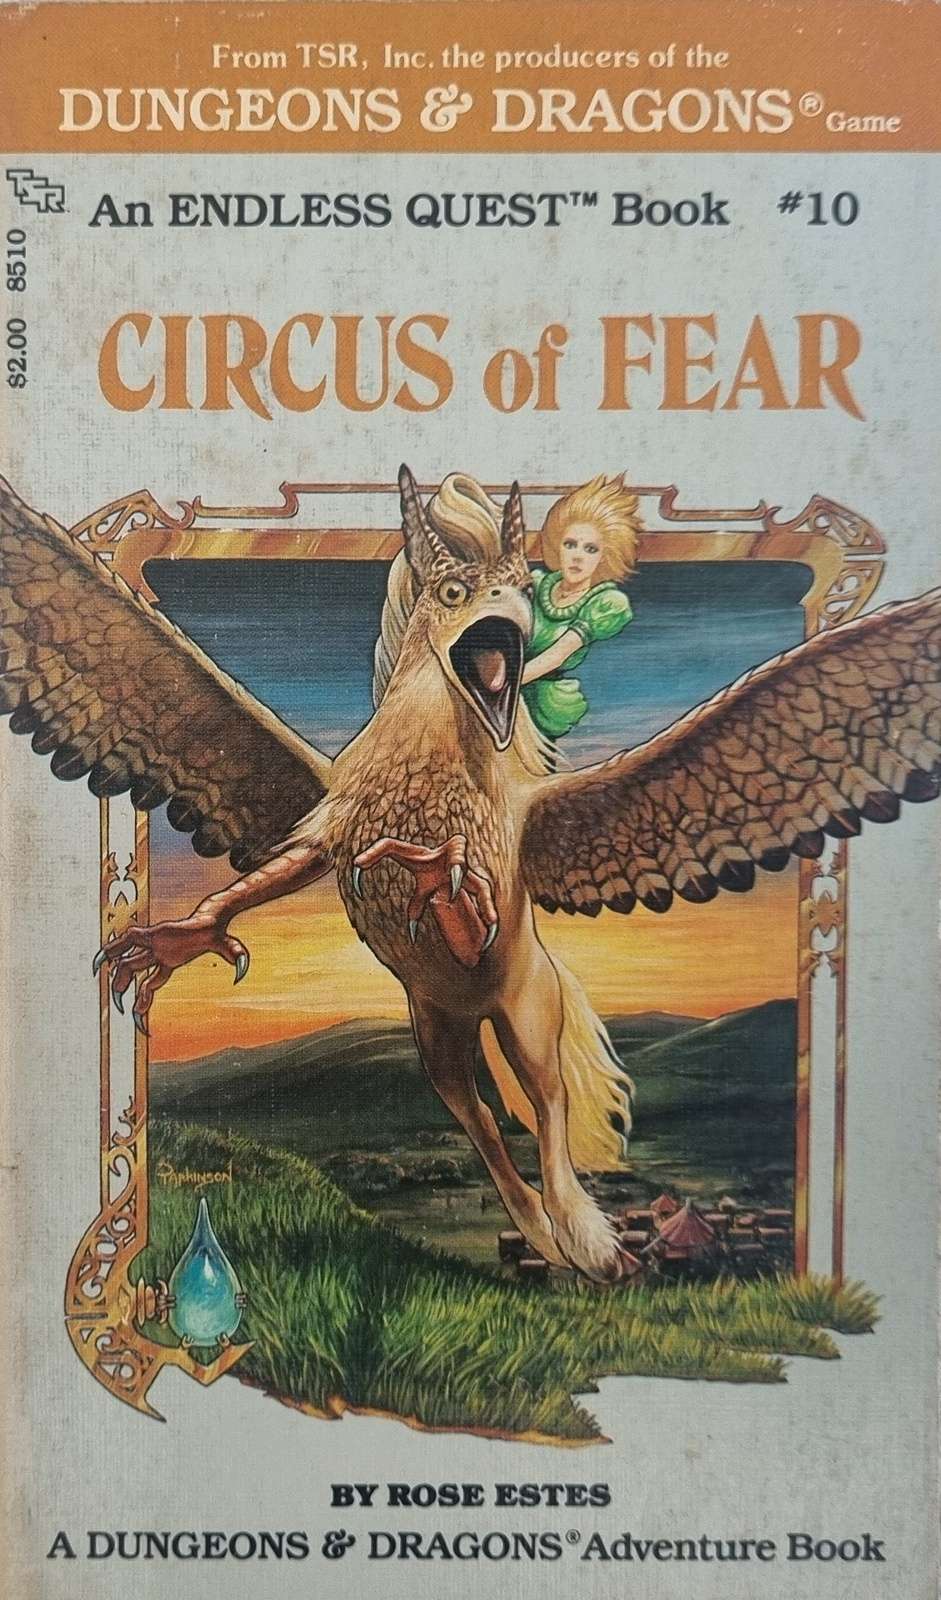 D&D Endless Quest Book - Circus of Fear #10